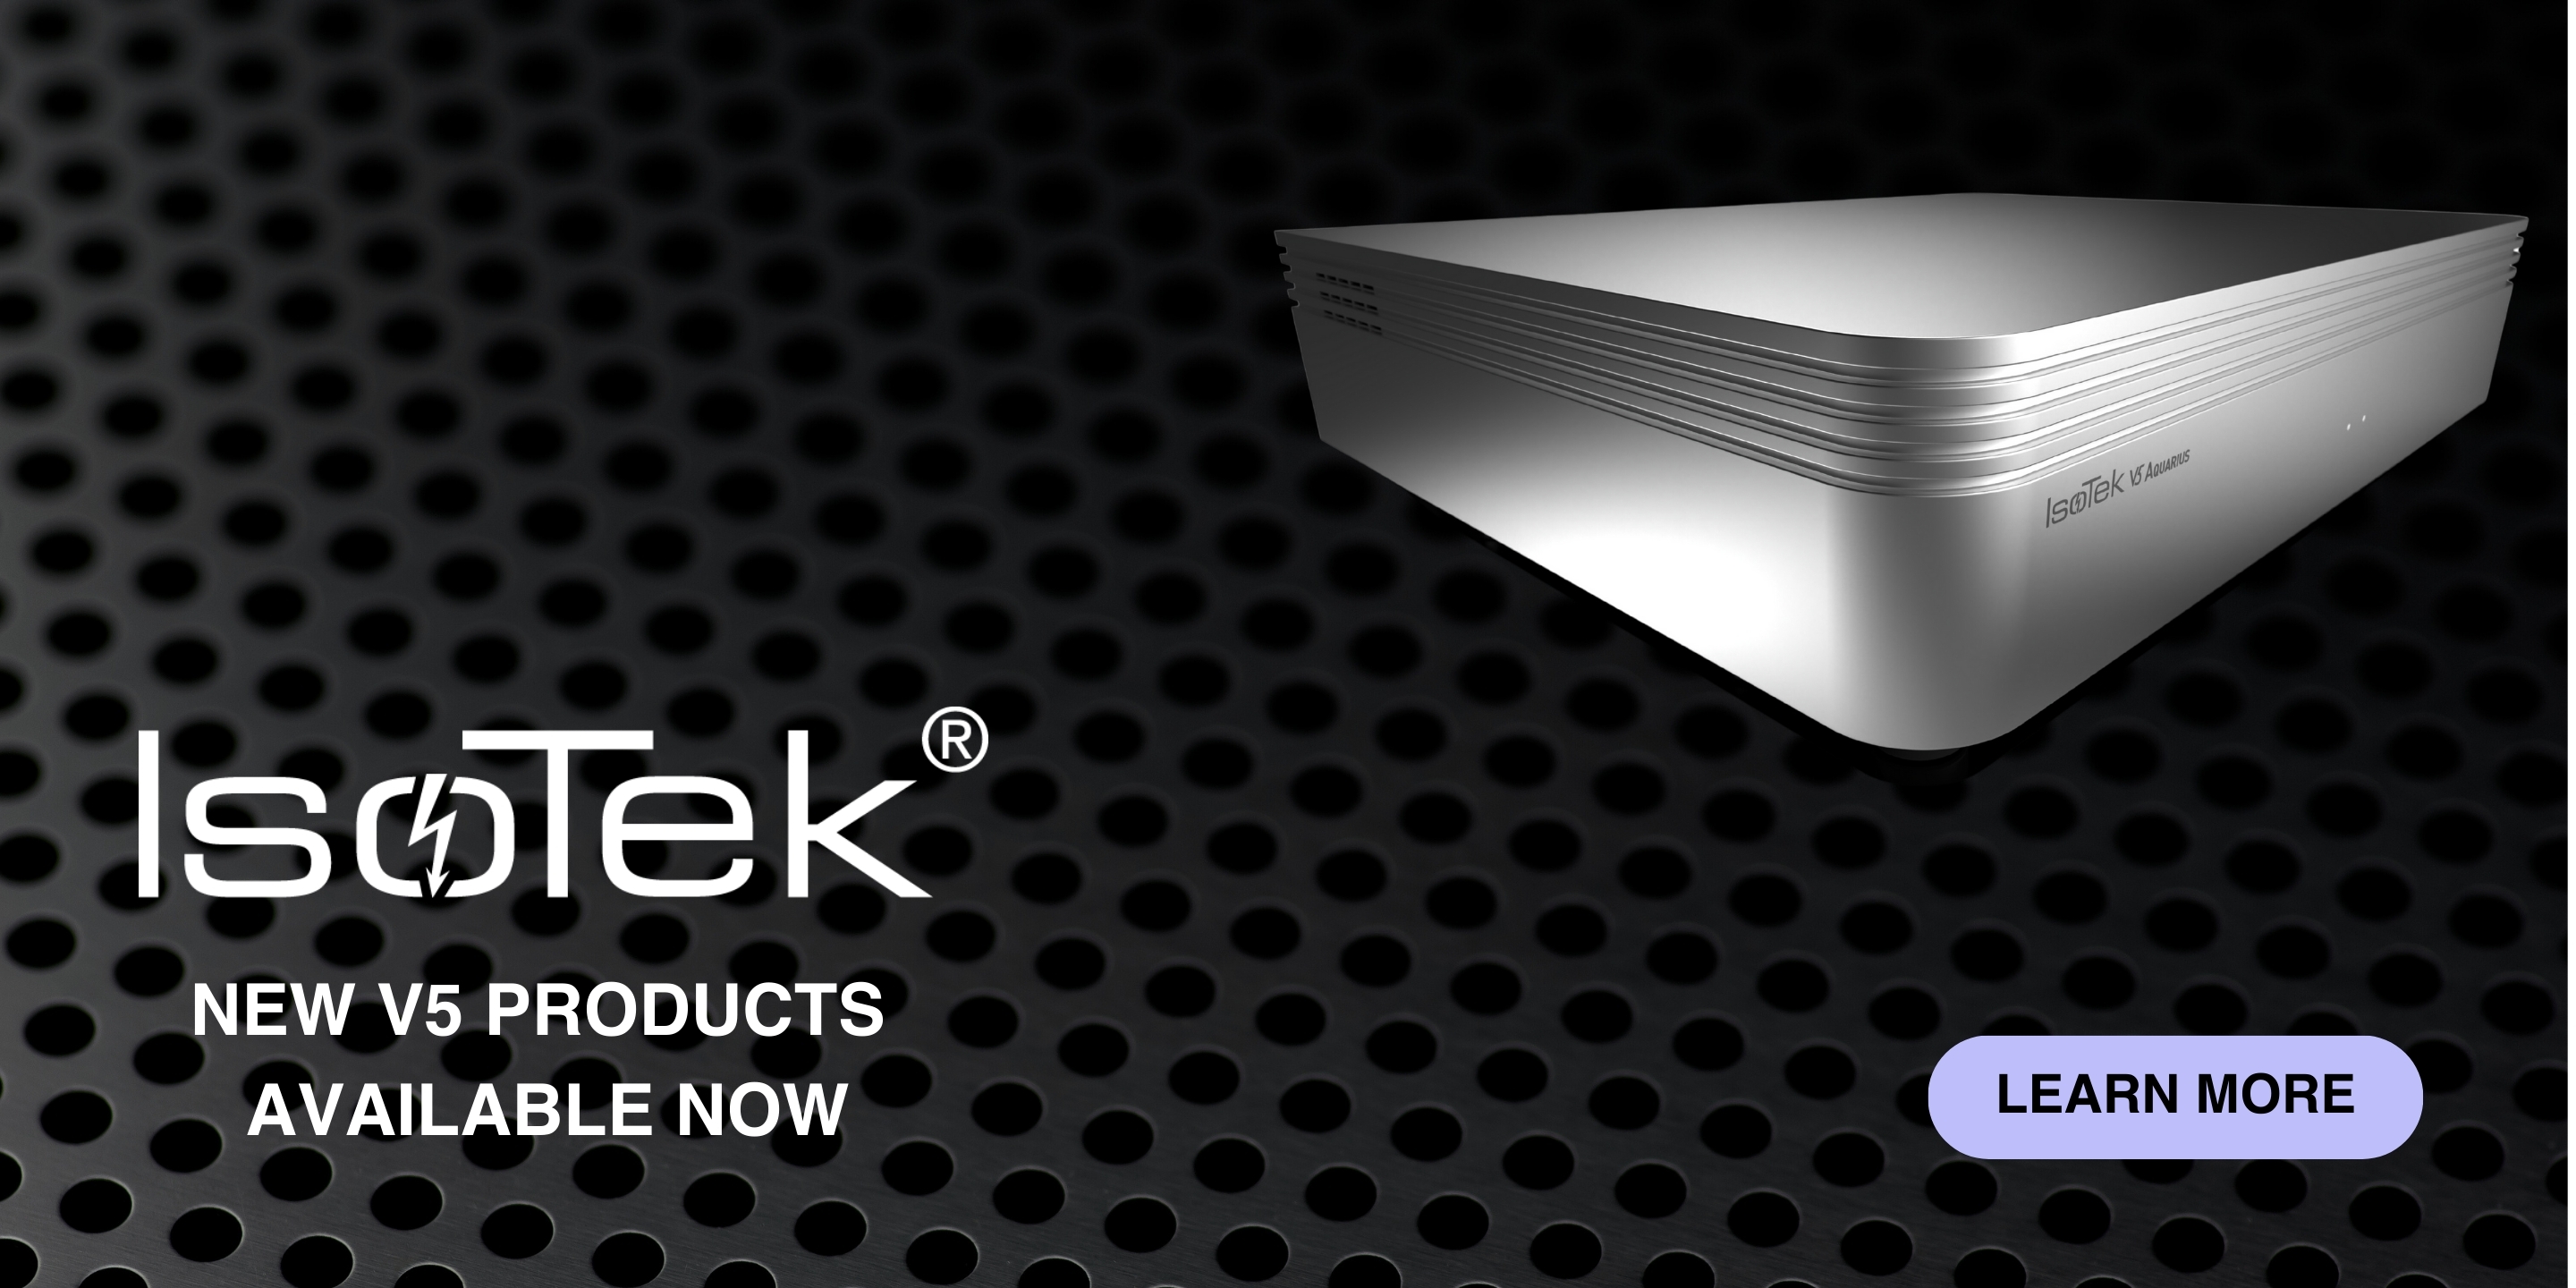 IsoTek New V5 Products Available